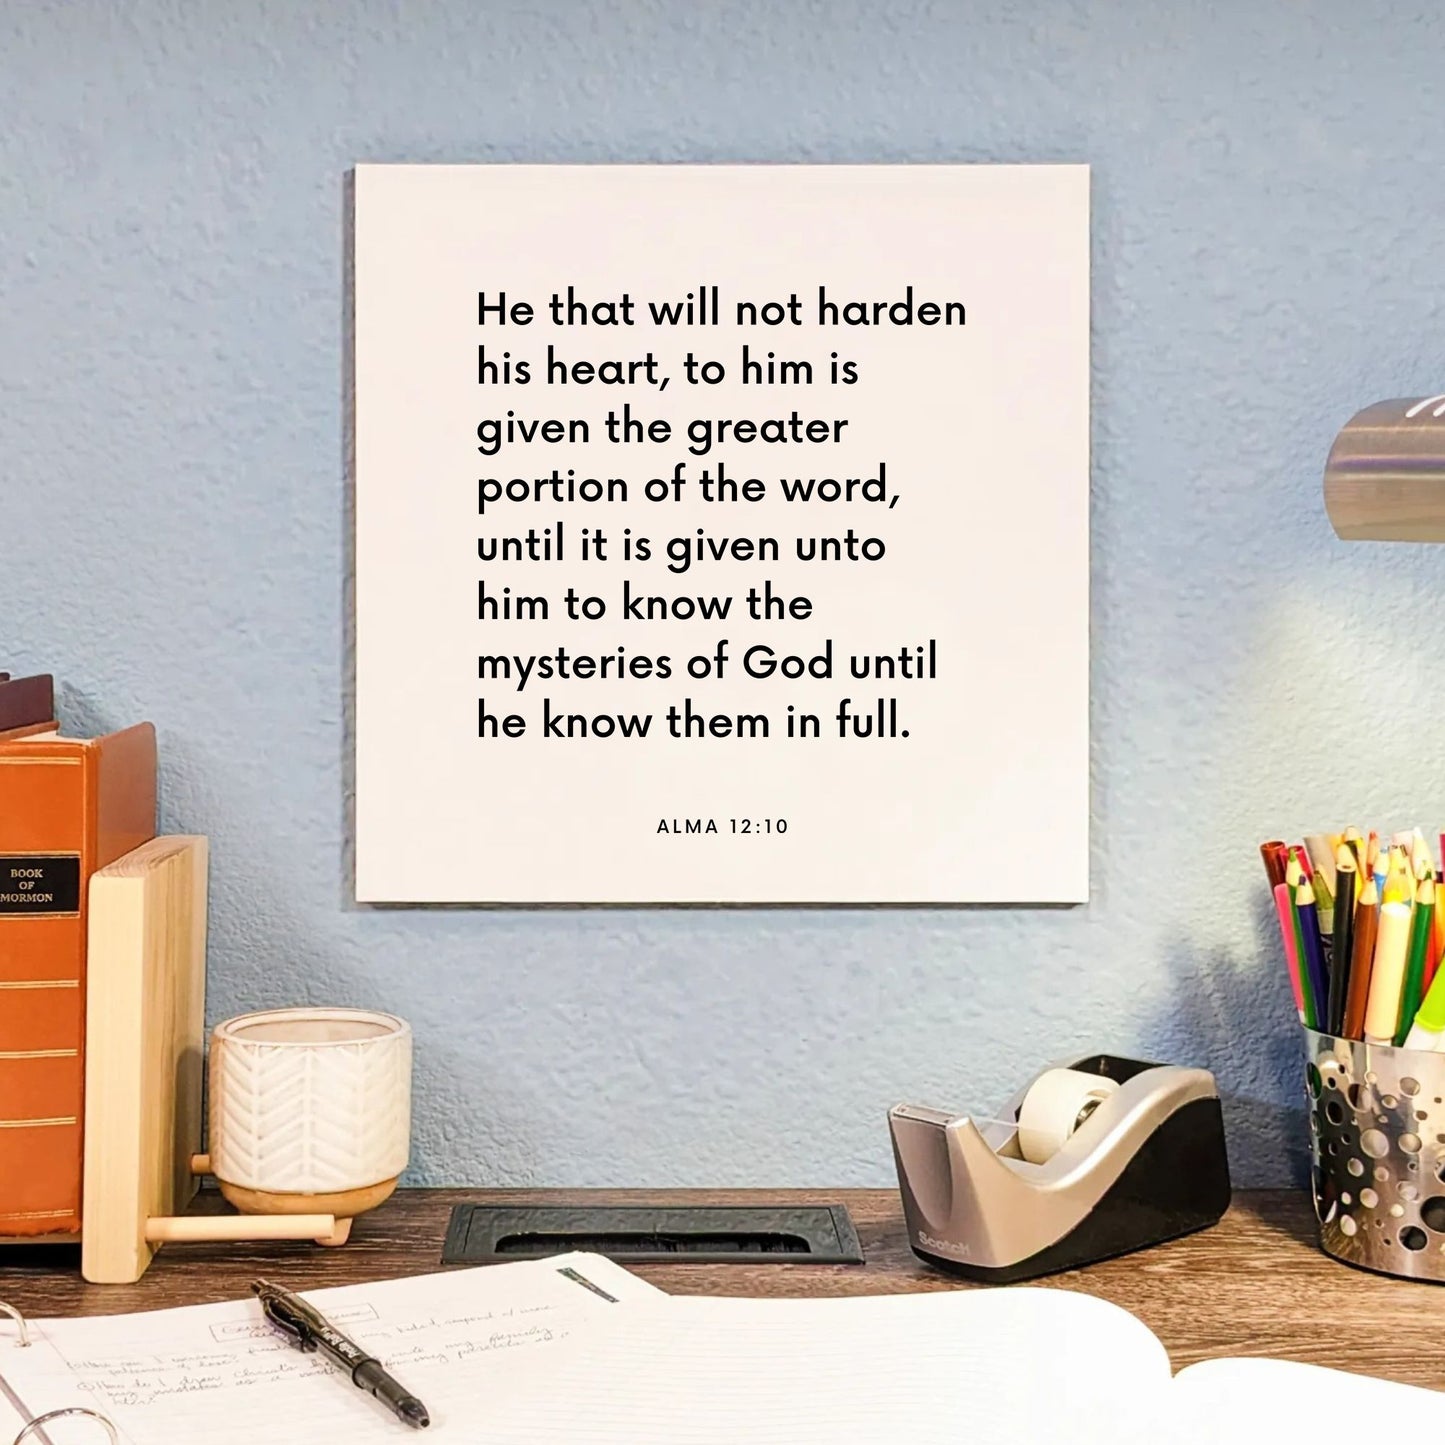 Desk mouting of the scripture tile for Alma 12:10 - "He that will not harden his heart"